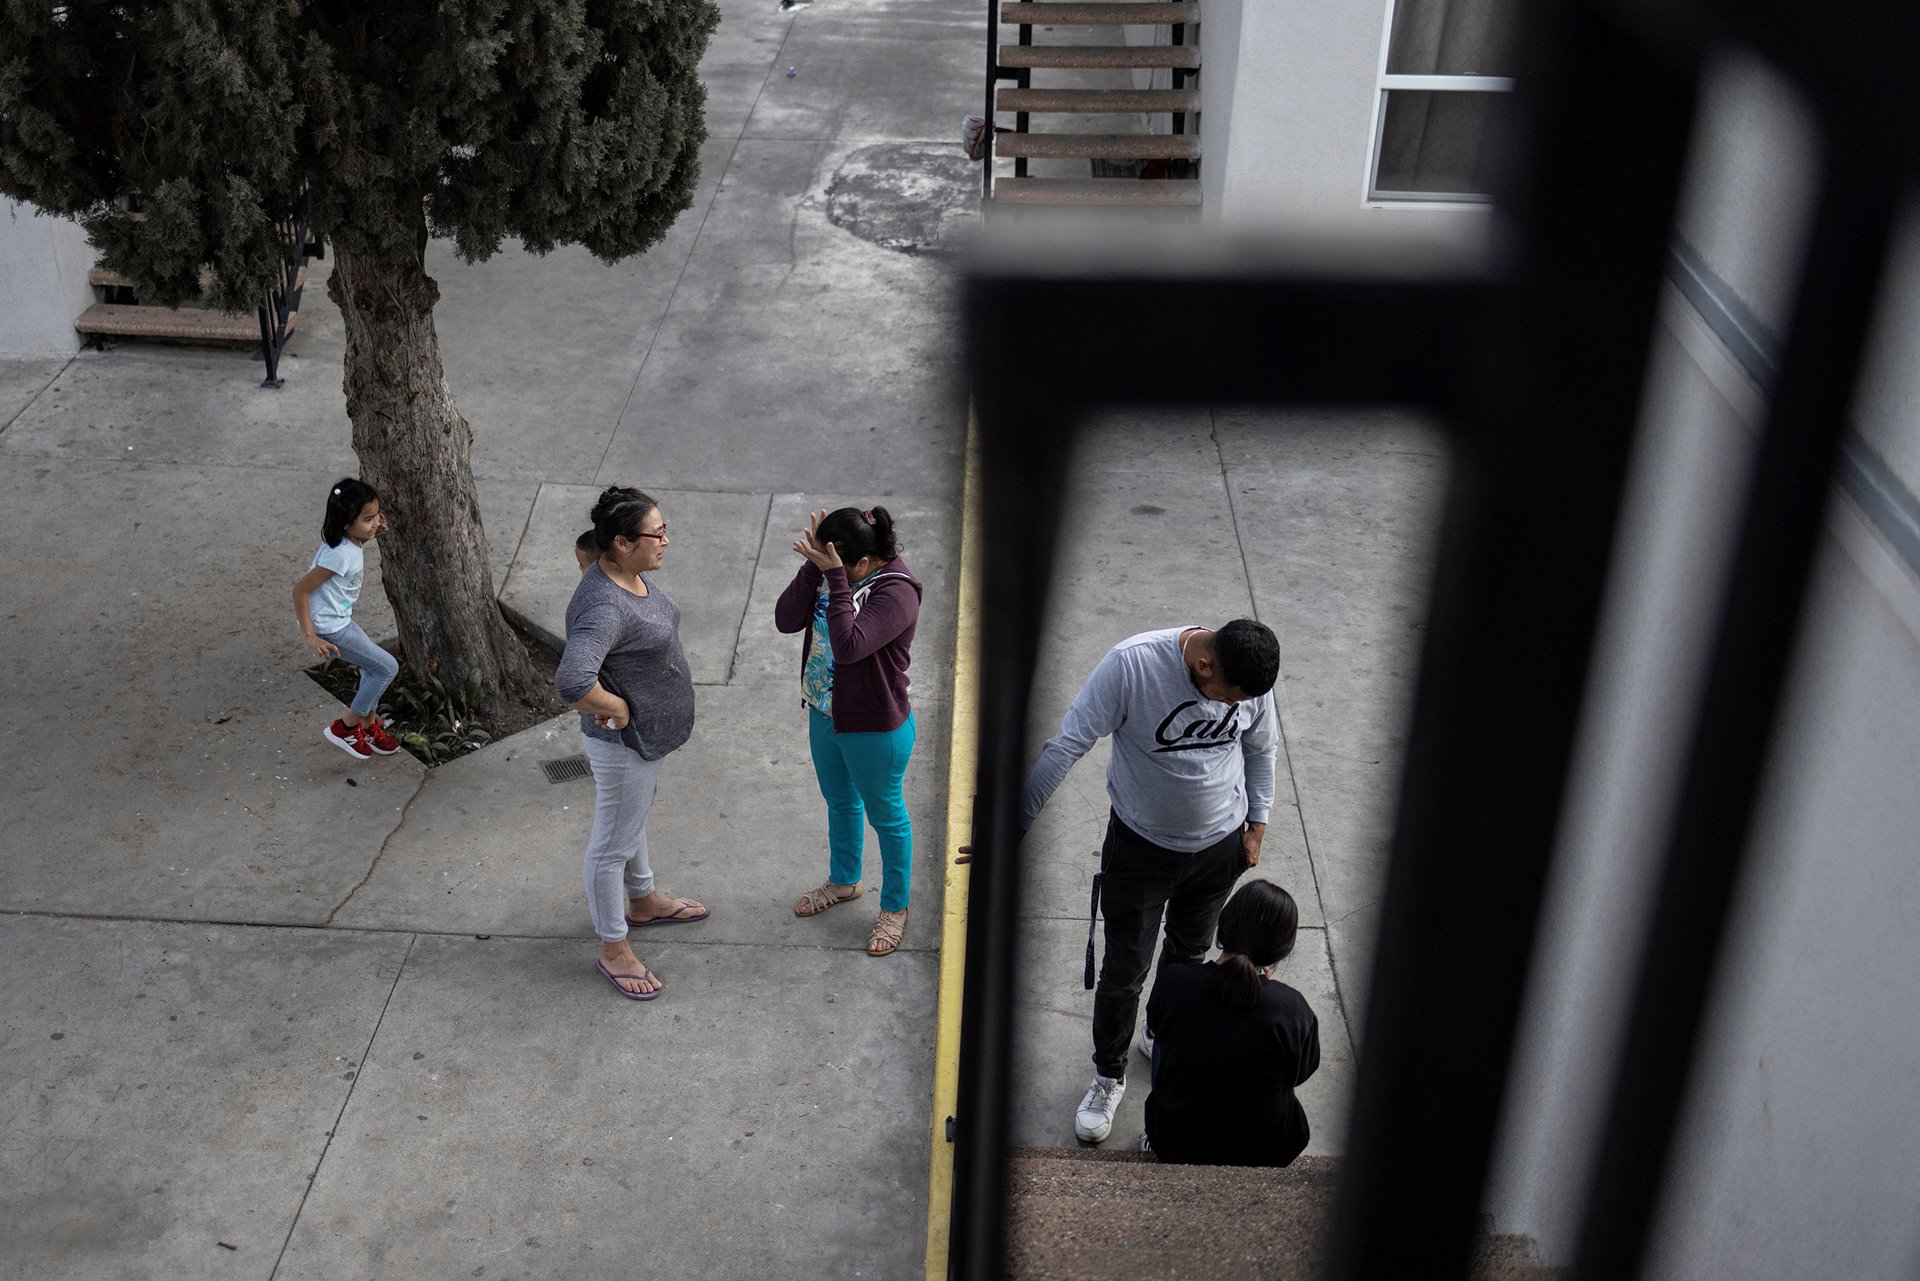 <p>Maria Hernandez cries as she chats with her friend Marta after viewing a potential apartment to rent in Los Angeles, California, United States. Without a credit history or sufficient documentation to open a bank account, Maria initially struggled to rent accommodation.</p>
